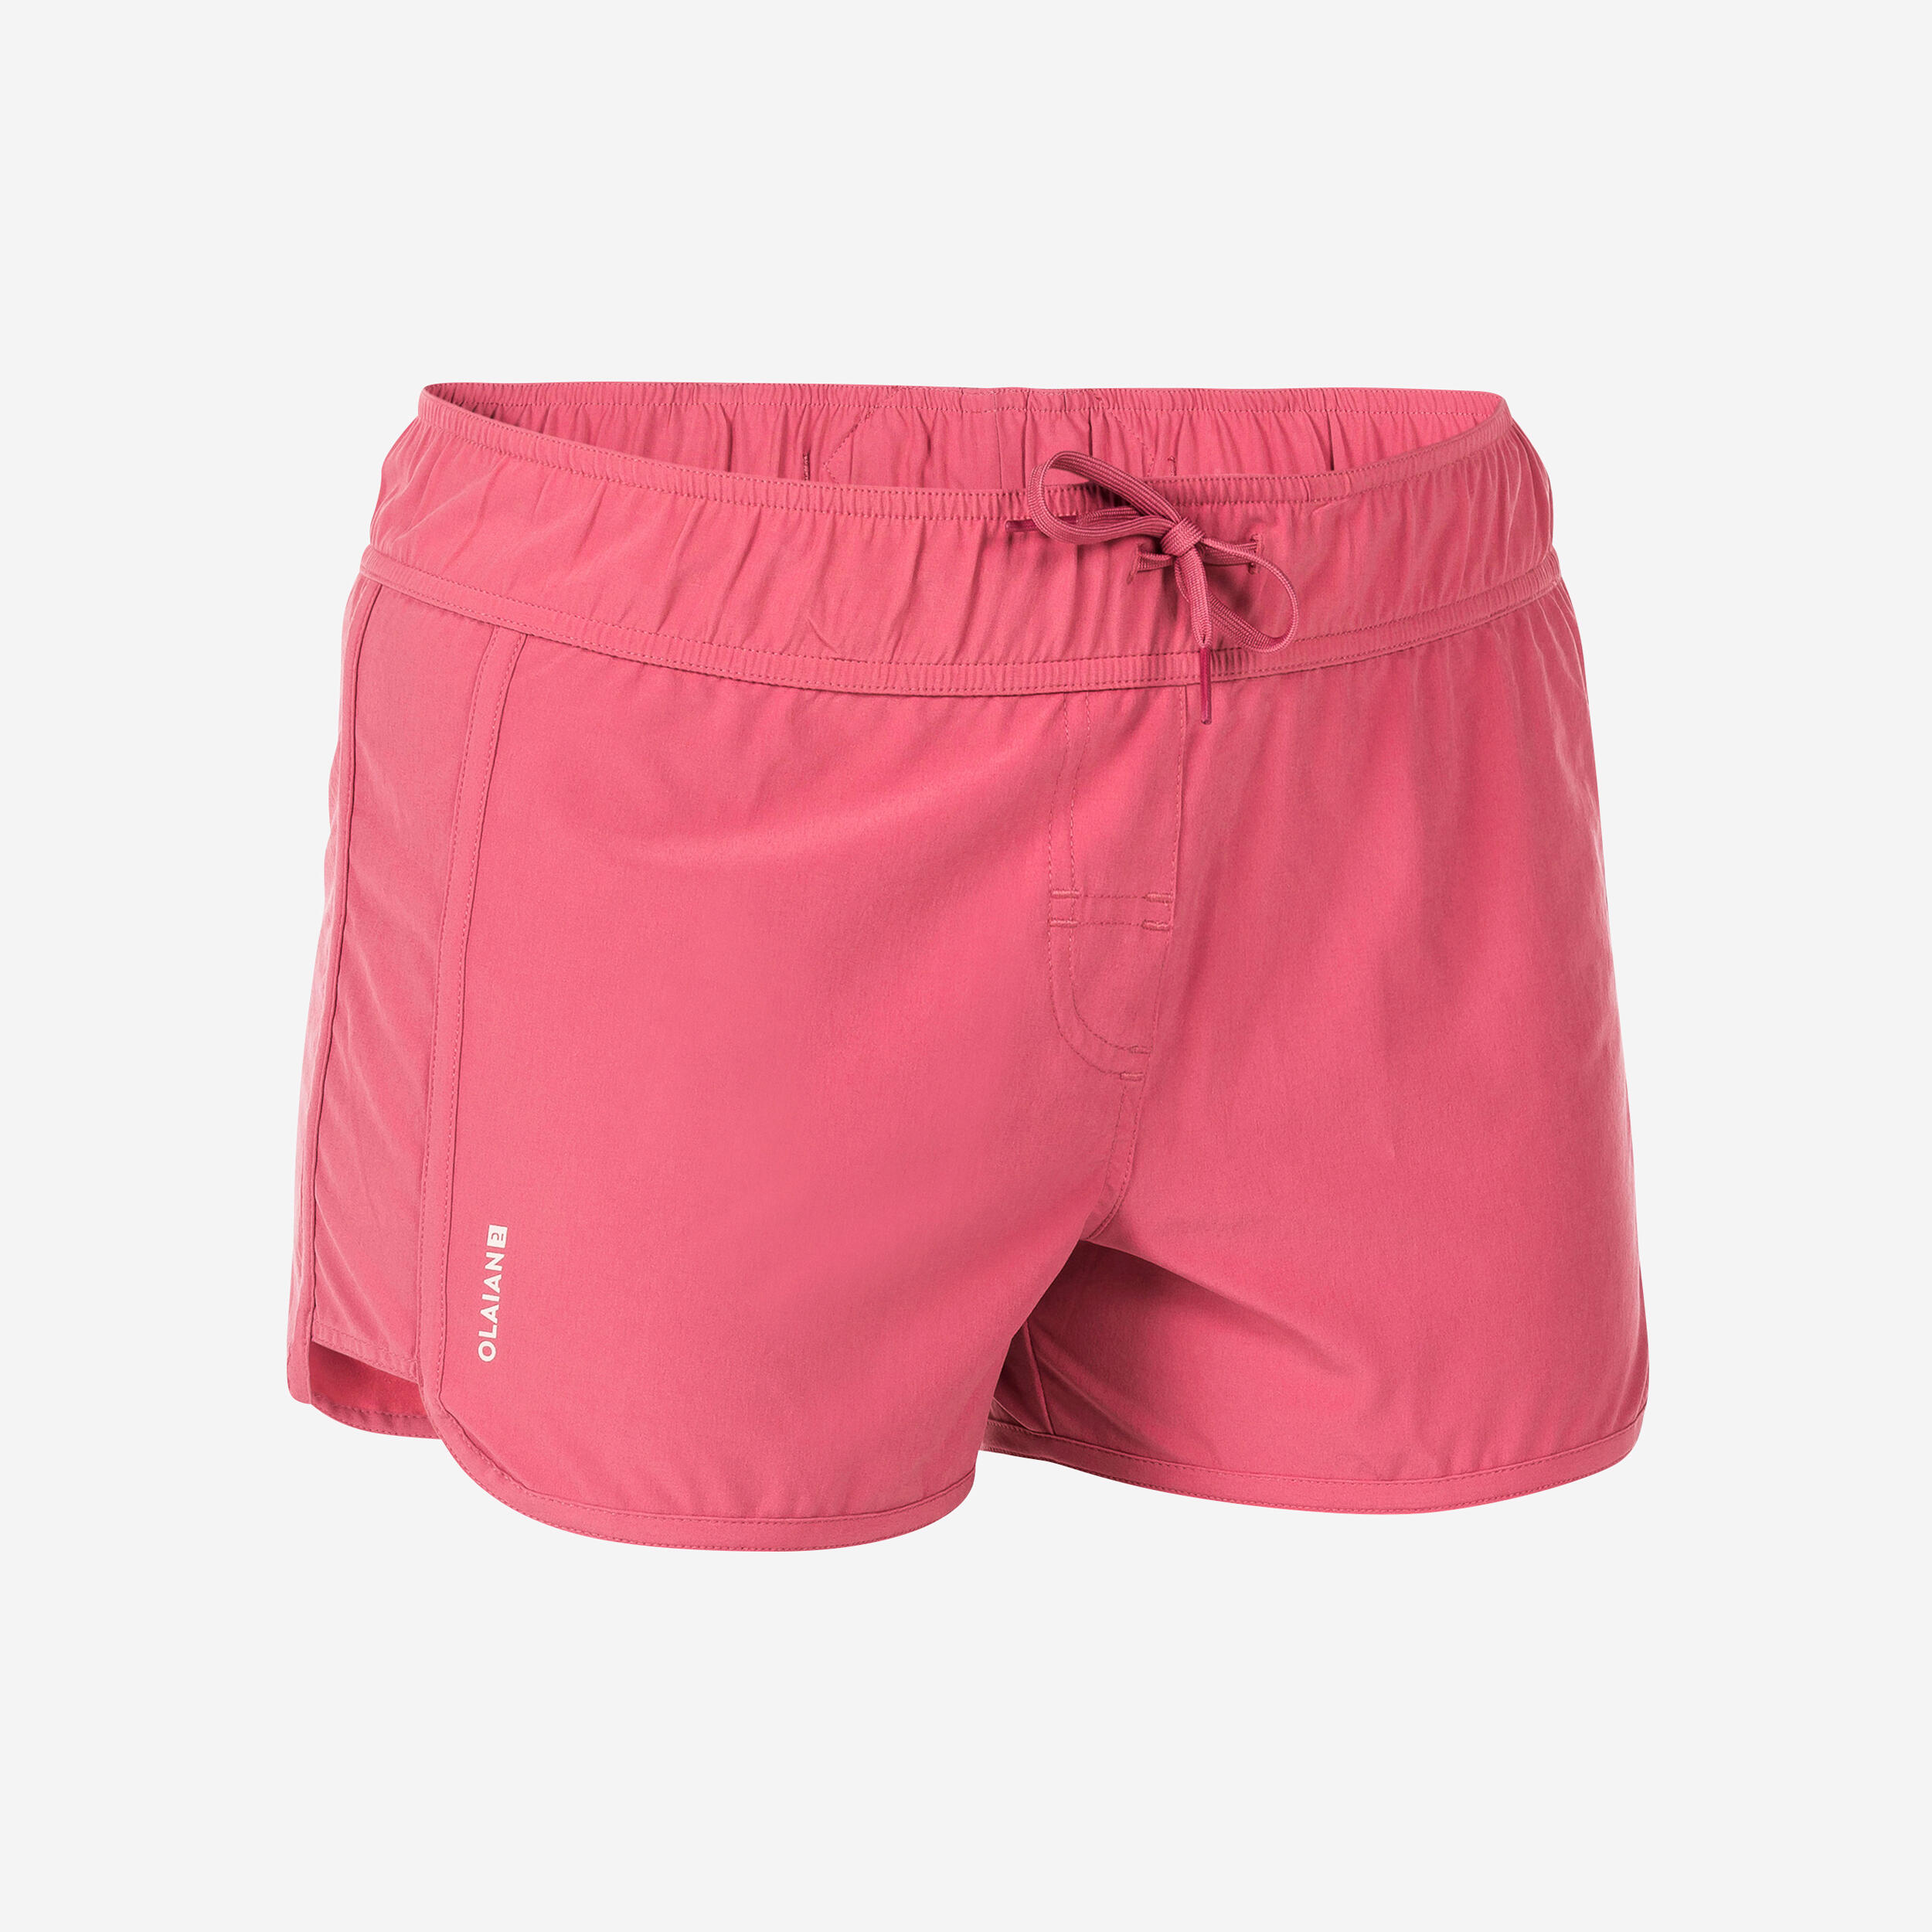 Women's Surfing Boardshorts with Elasticated Waistband and Drawstring TINI PINK 1/12